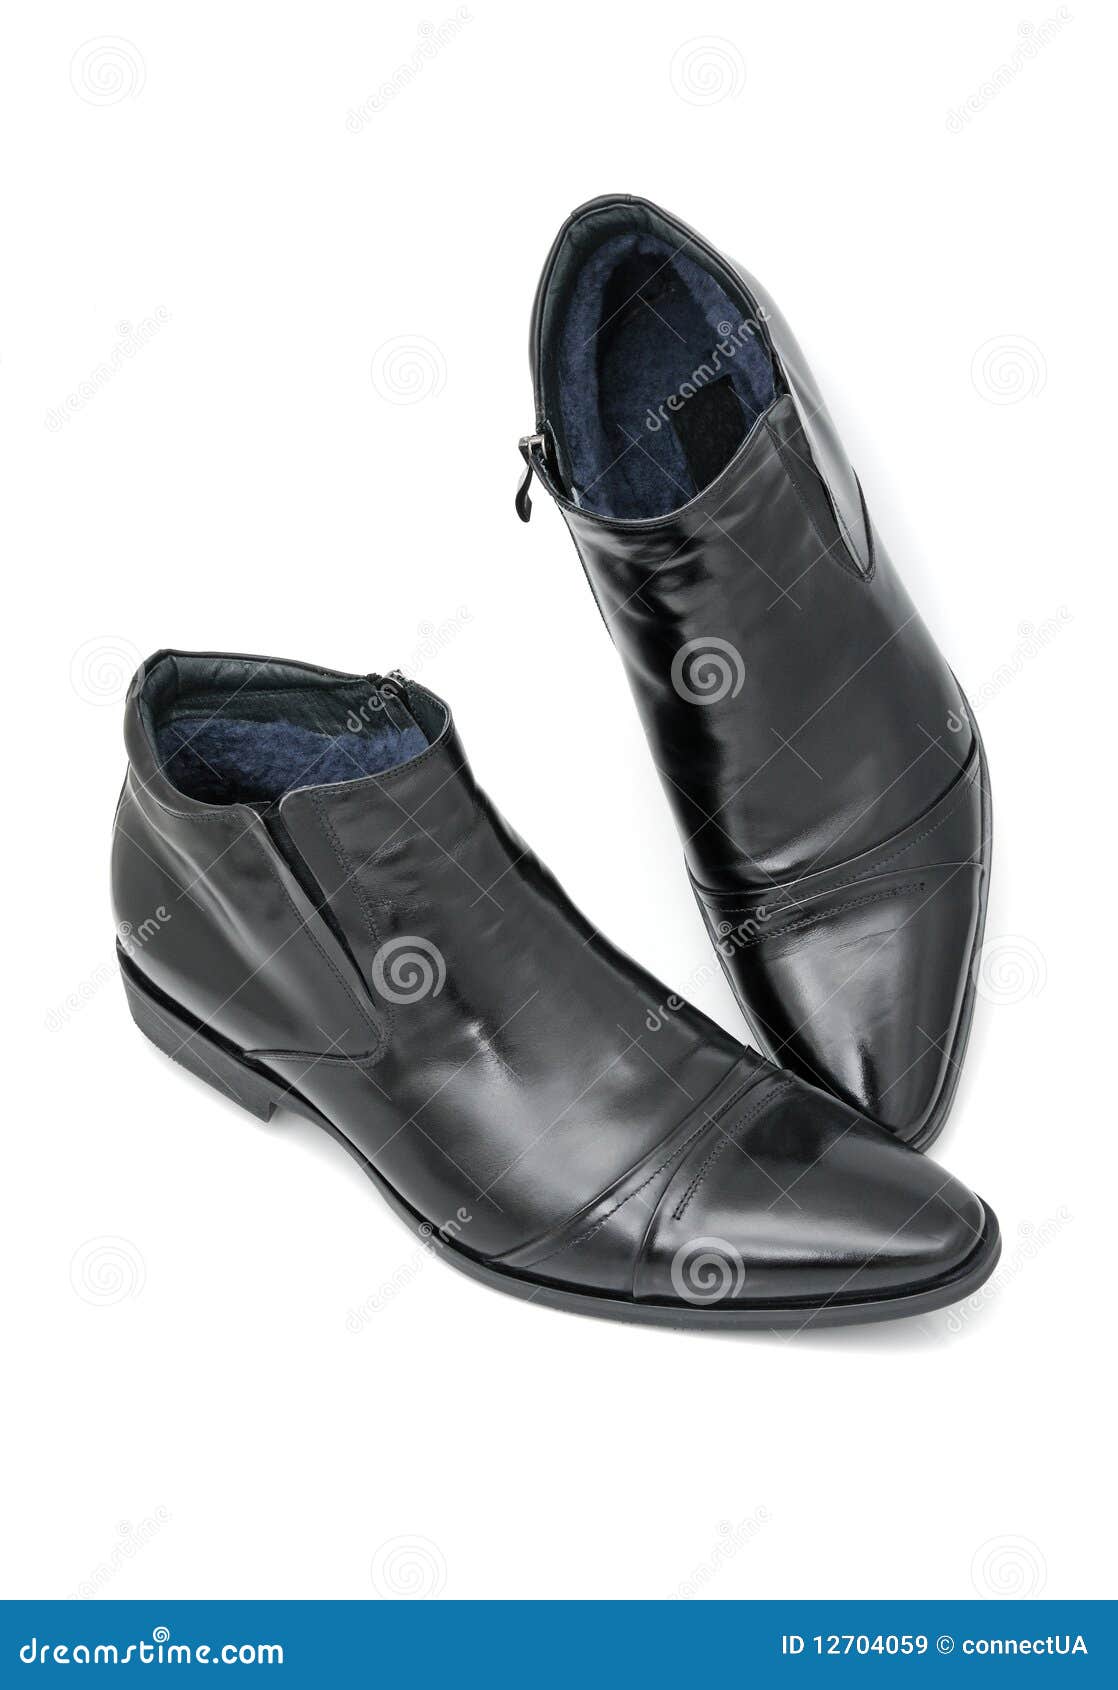 Leather shoes stock image. Image of boots, shoes, black - 12704059